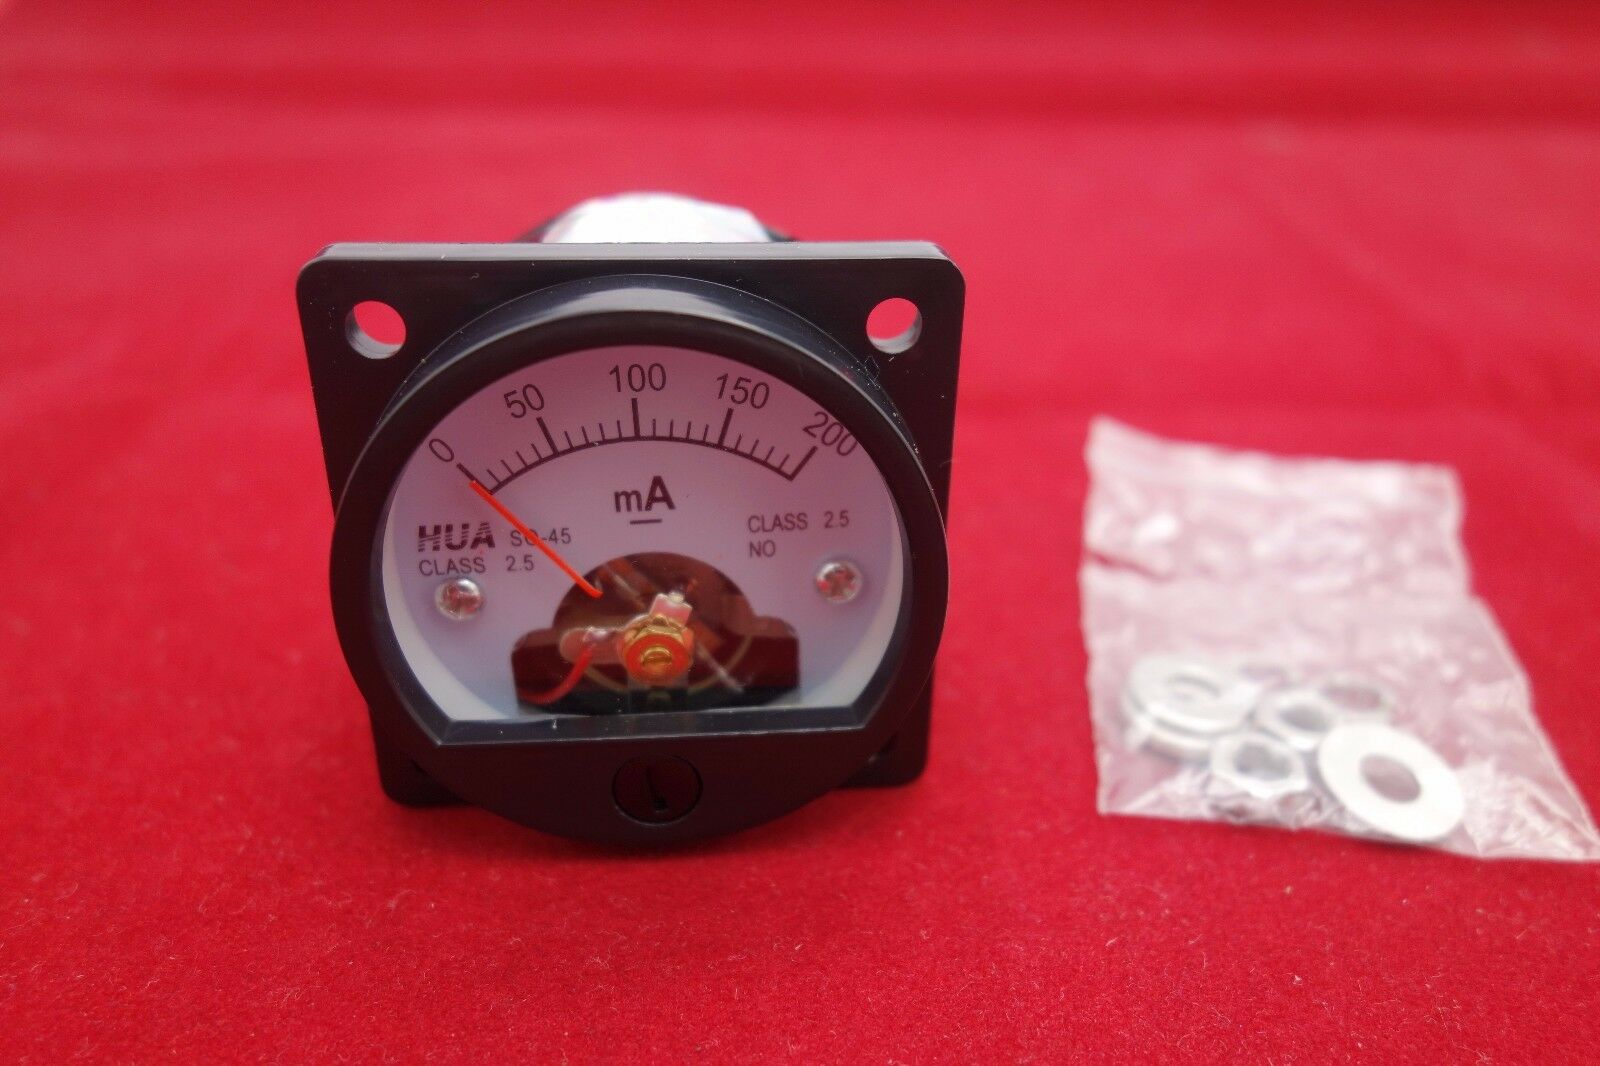 1PC DC 0-200MA Analog Ammeter Panel AMP Current Meter SO45 Cutout 45mm